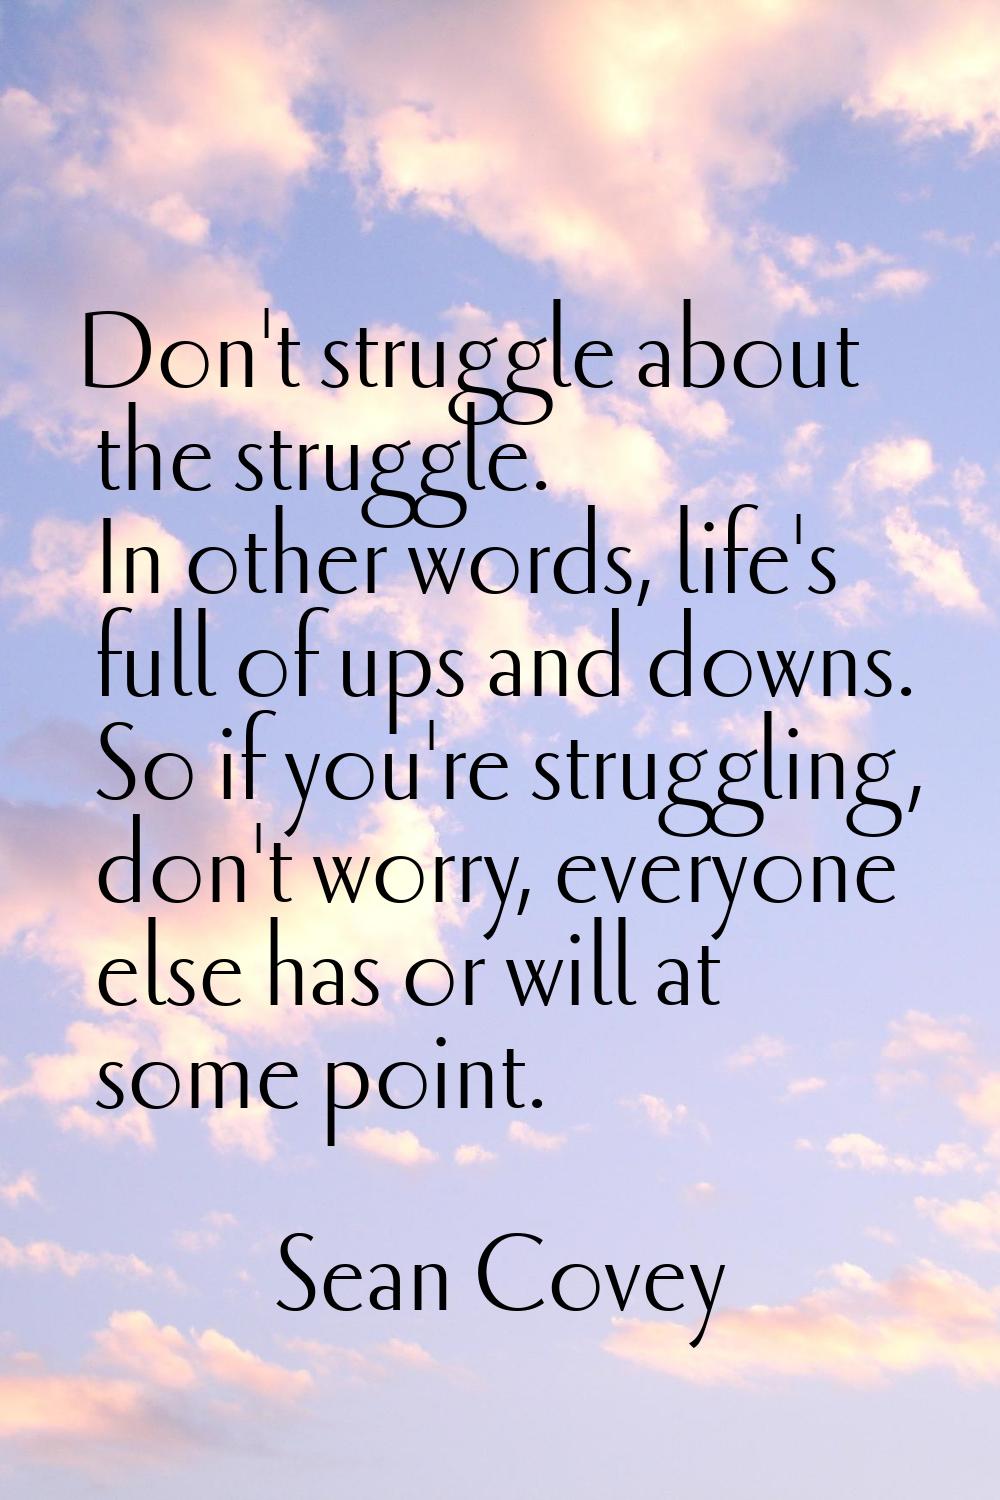 Don't struggle about the struggle. In other words, life's full of ups and downs. So if you're strug